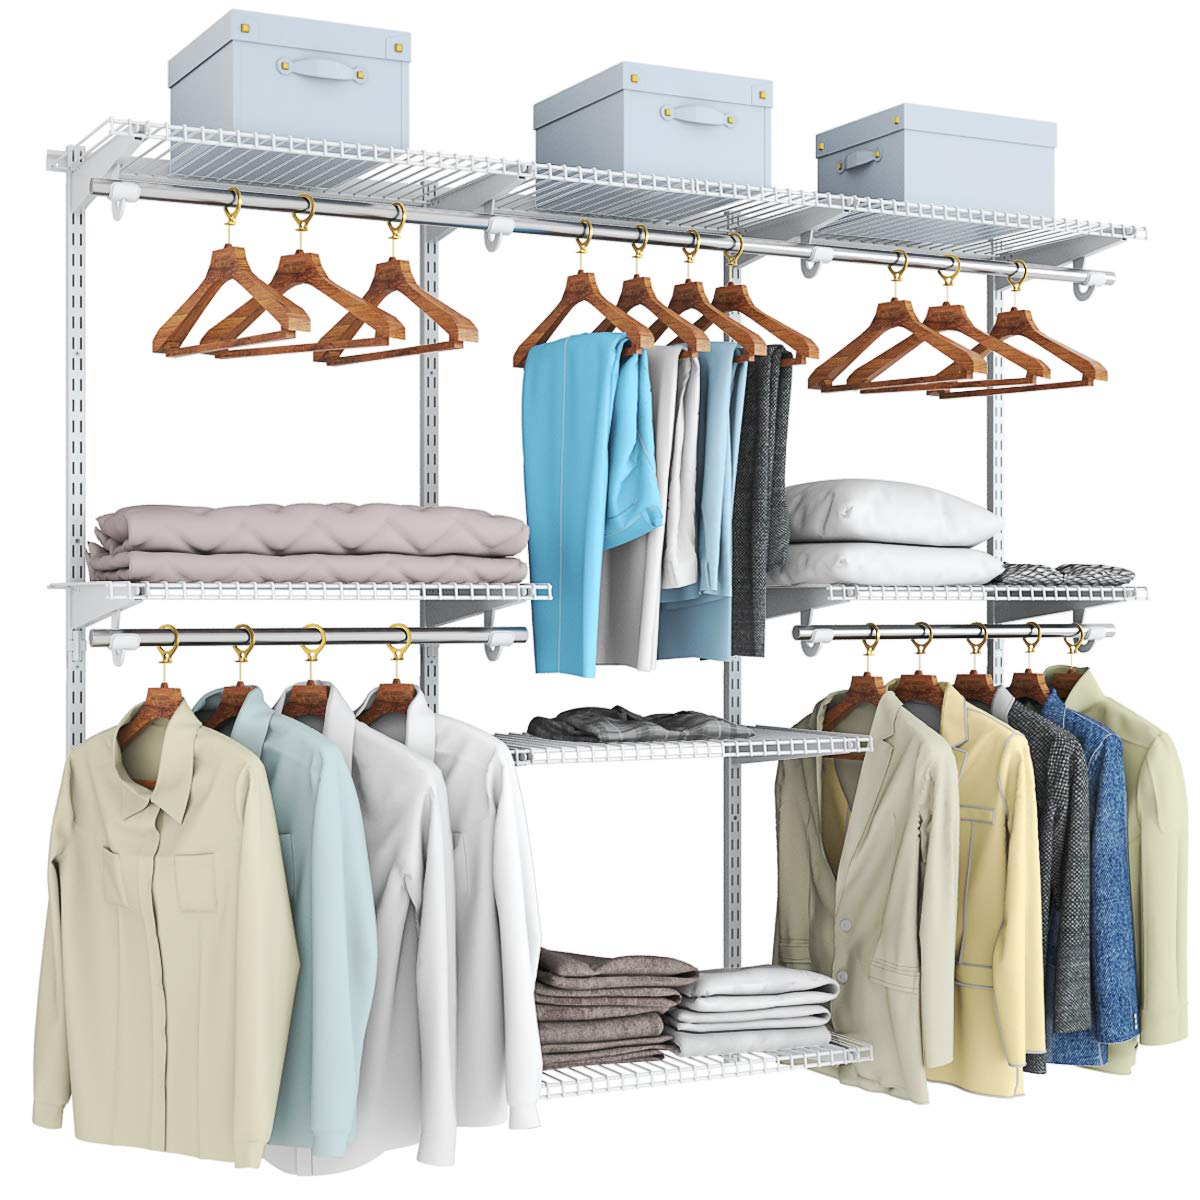 Tangkula Garment Rack with Shelves, Clothes Rack with 5 Shelves & Hanging  Bar, Open Wardrobe for Hanging Clothes and Storage, Free Standing Closet